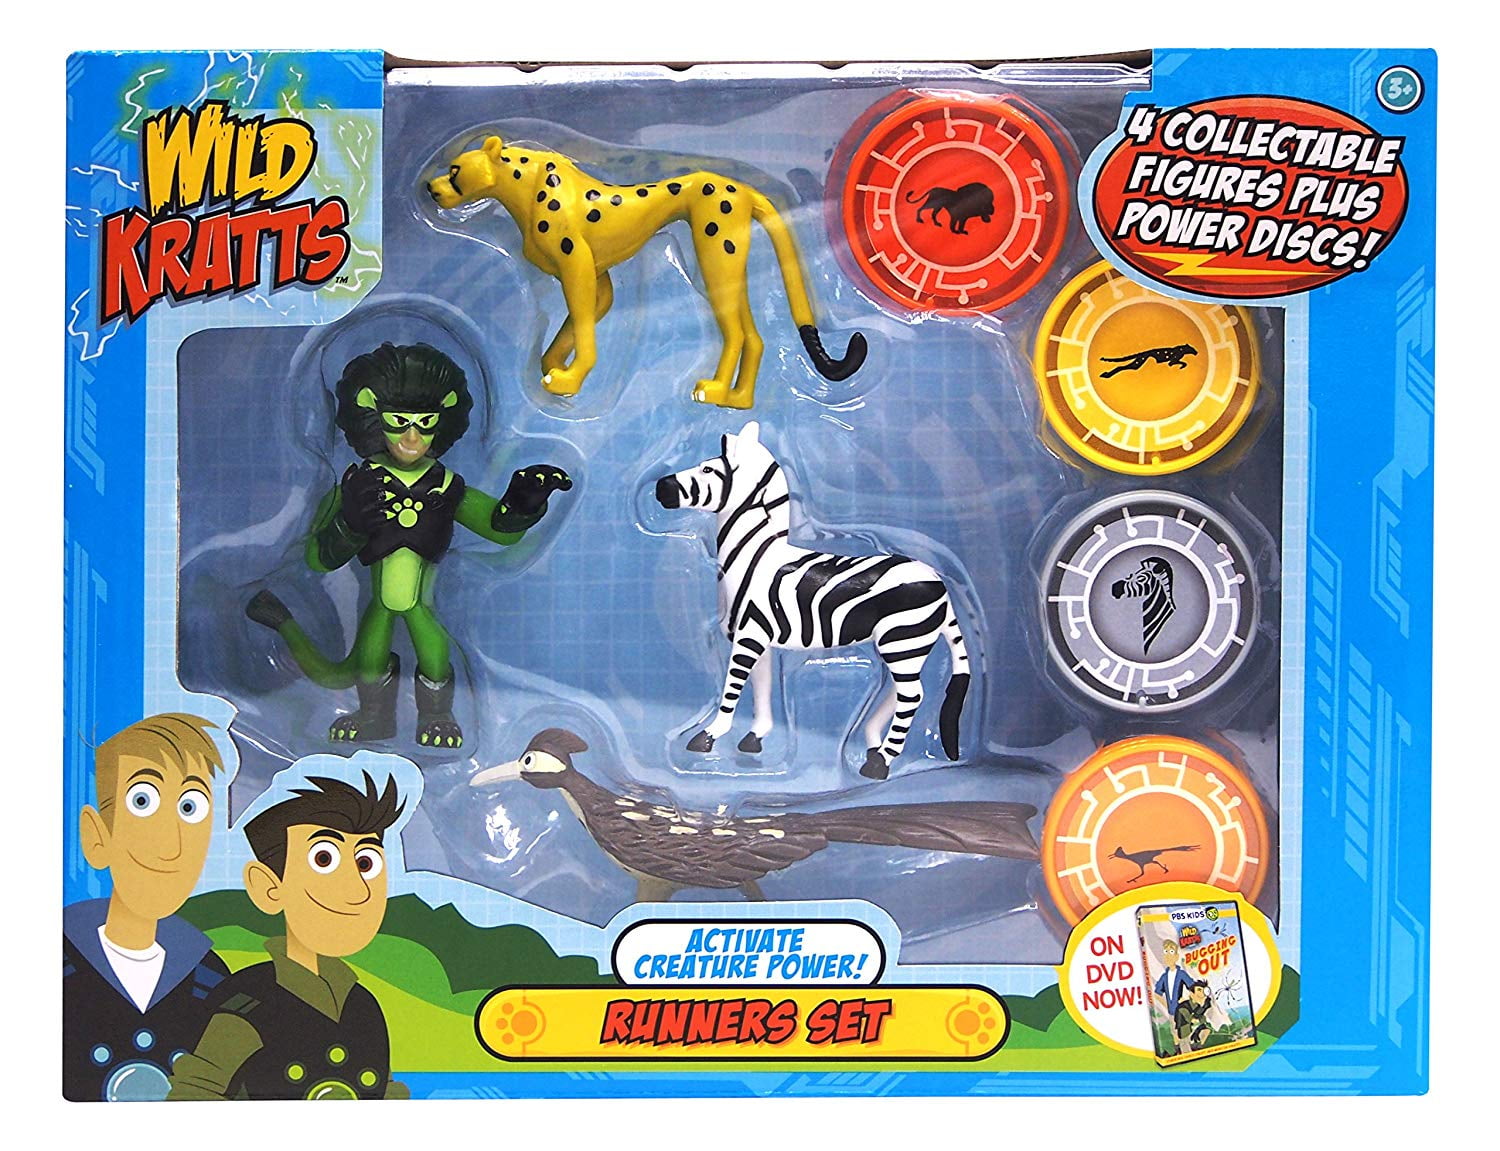 Action Toy Figures Playsets Vehicles Toys Games Martin Kratt Wild Kratts Toys Creature Power Disc Holder Set With Discs Playsets Viventodvere Sk